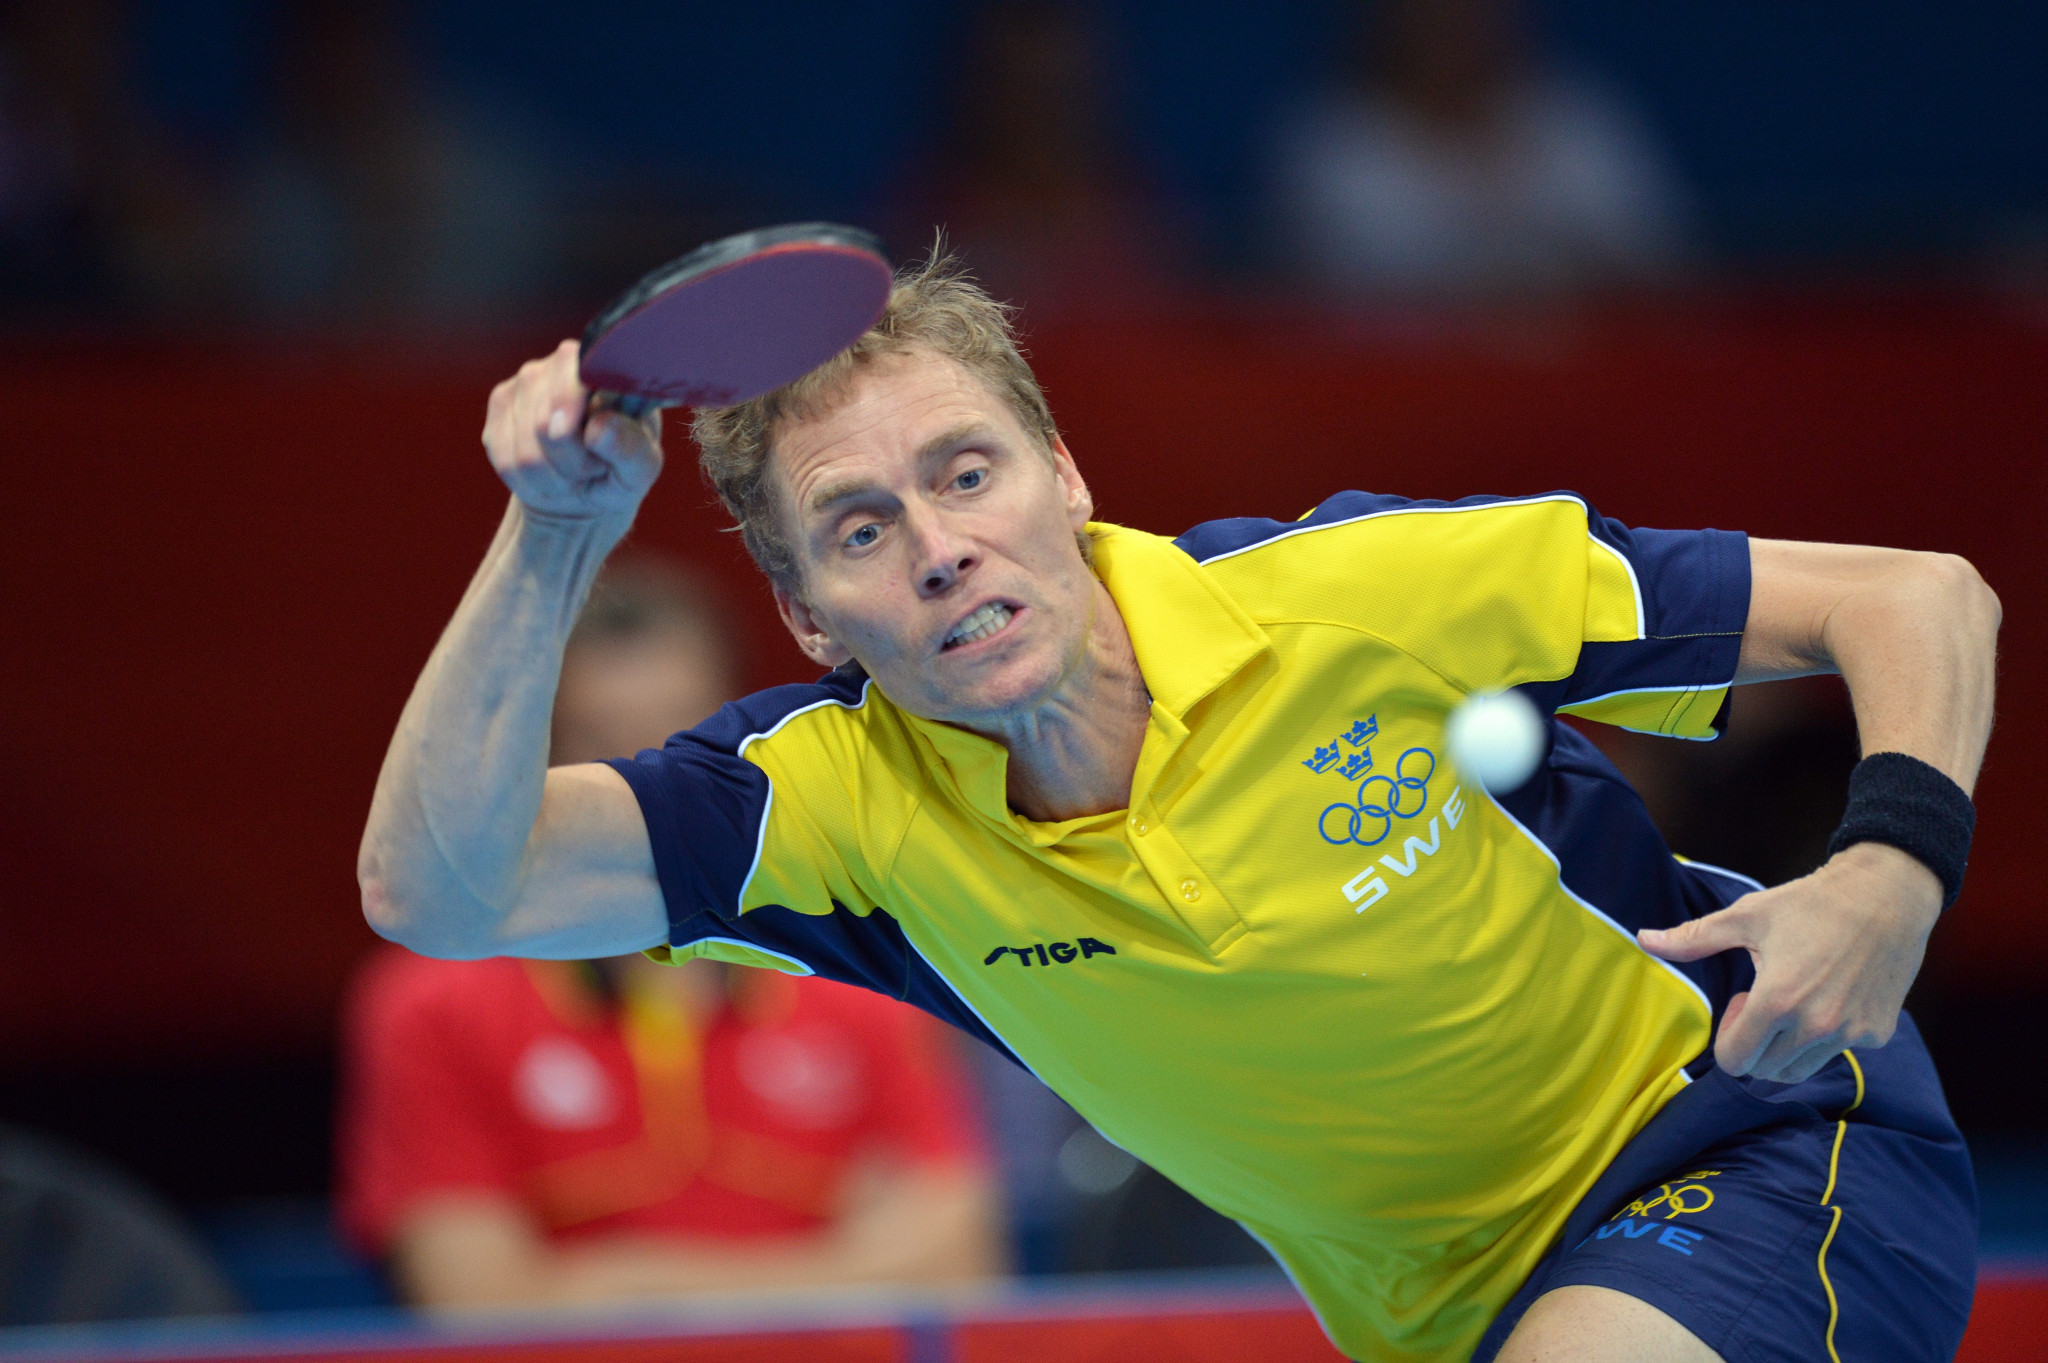 Persson appointed Swedish men's table tennis team coach